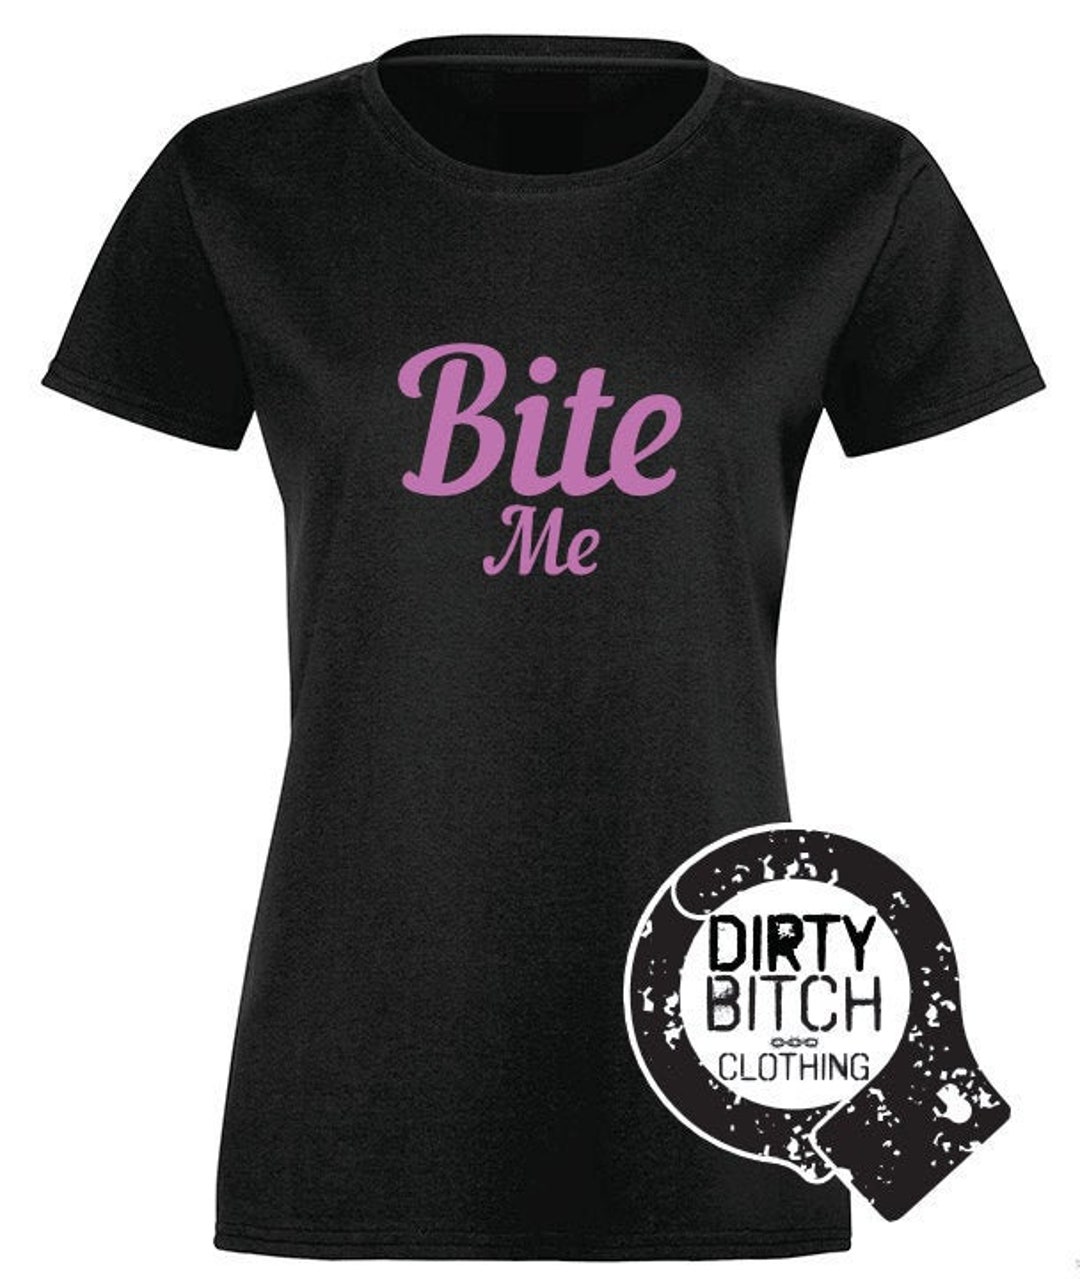 Bite Me Adult T-shirt Clothing Boobs Hotwife Cuckold image